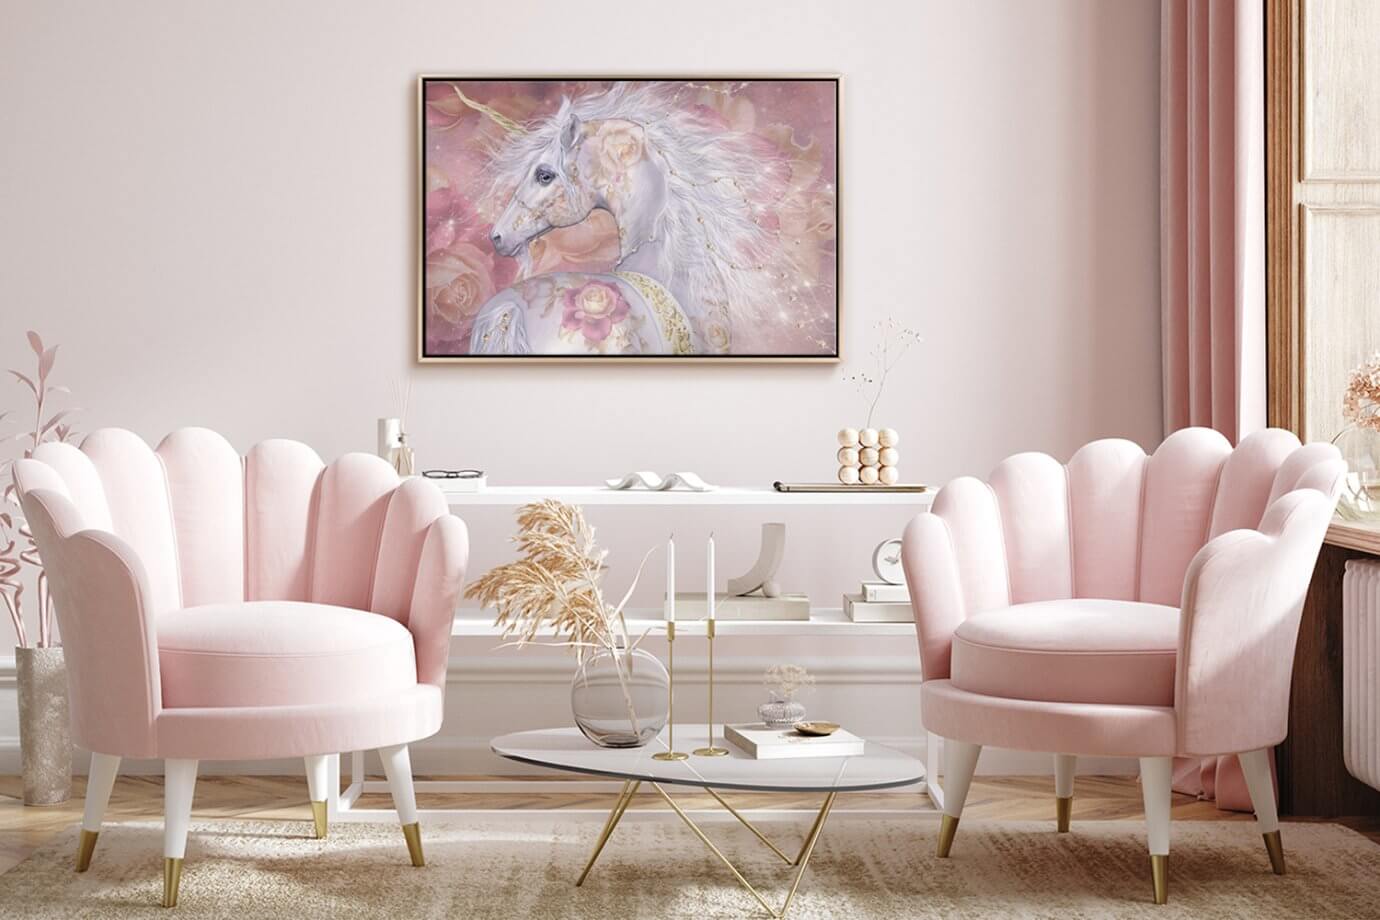 unicorn artwork in a pink room